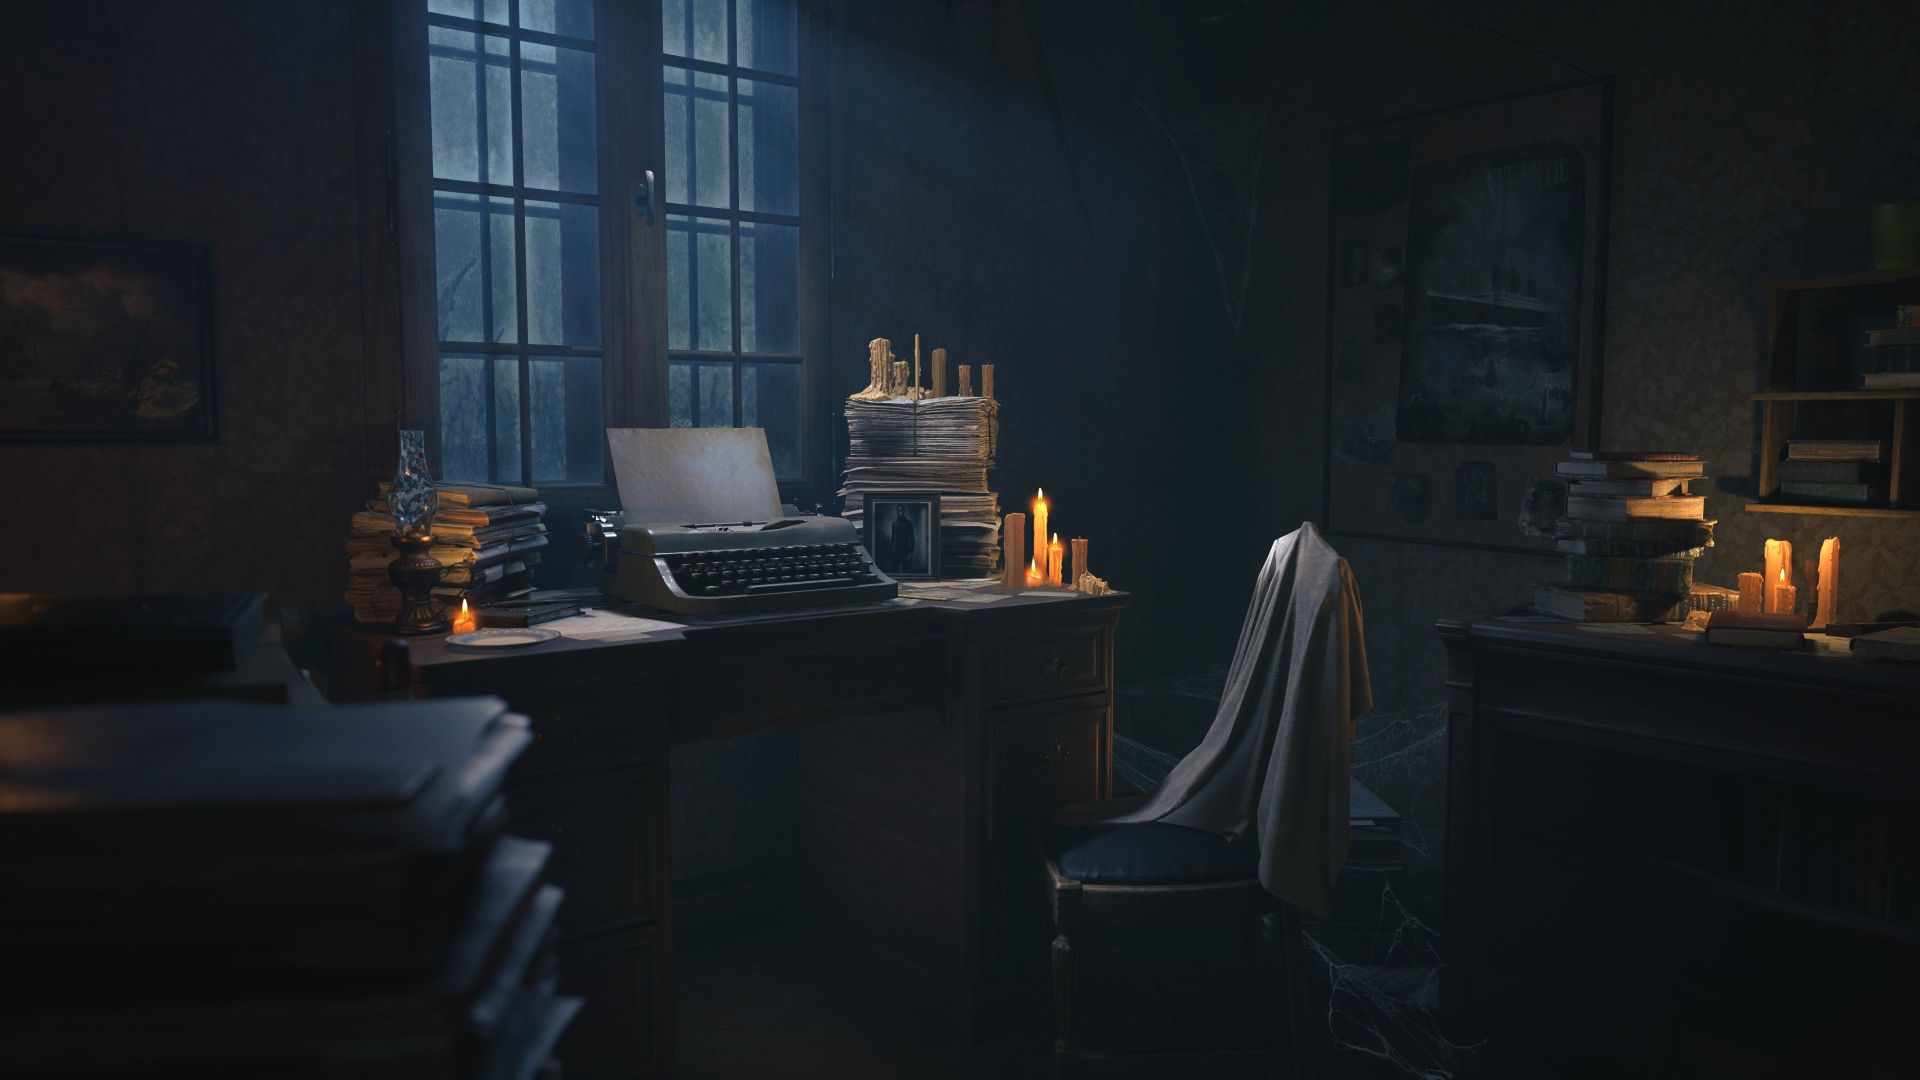 Layers of Fear Trailer Teases Horrors at the Lighthouse